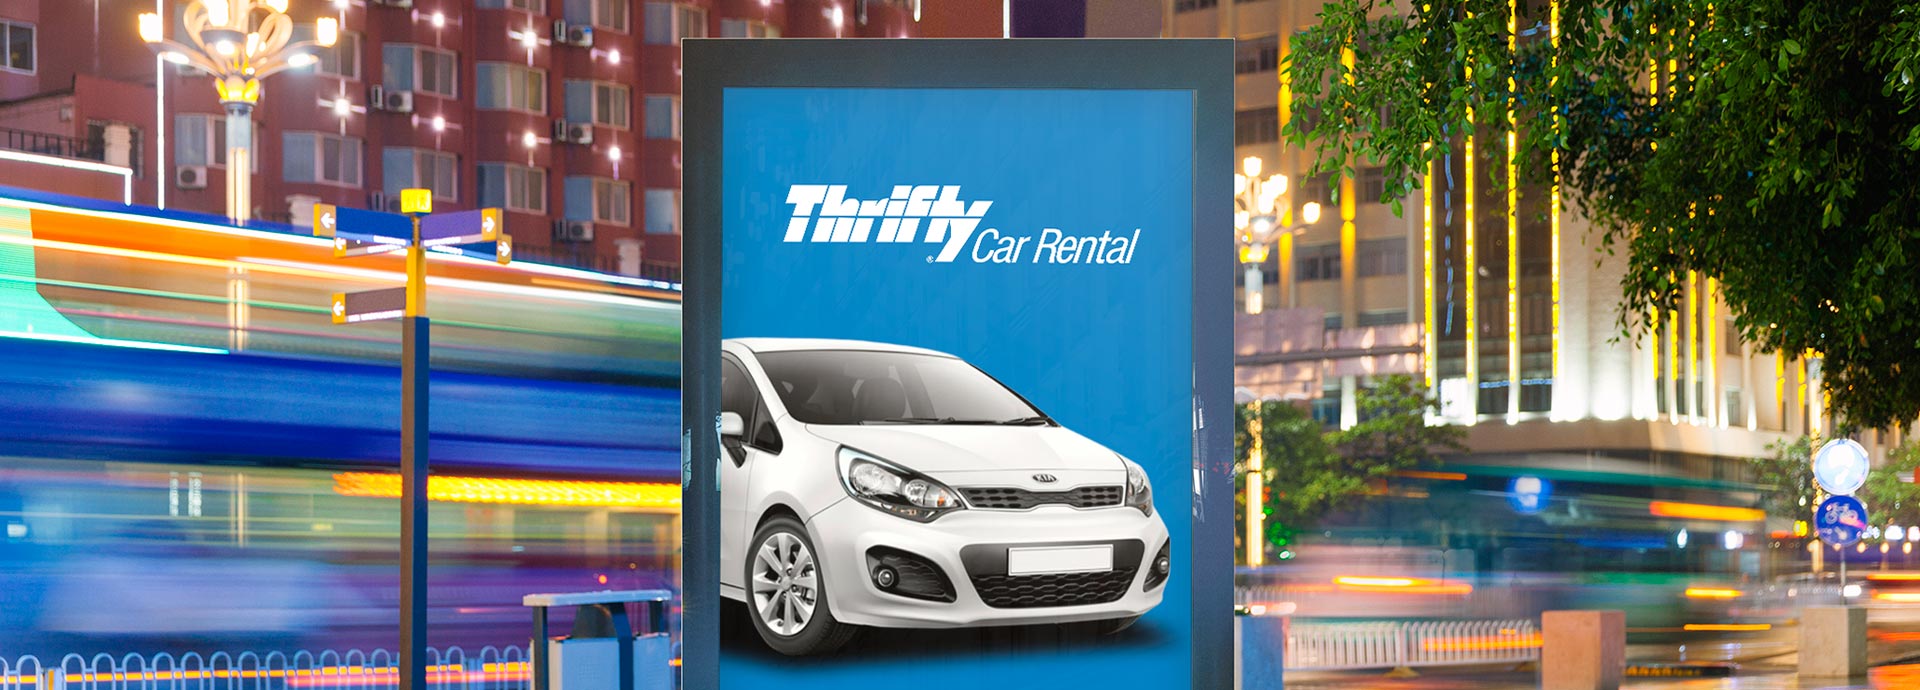 Thrifty Fort Lauderdale | RentingCarz